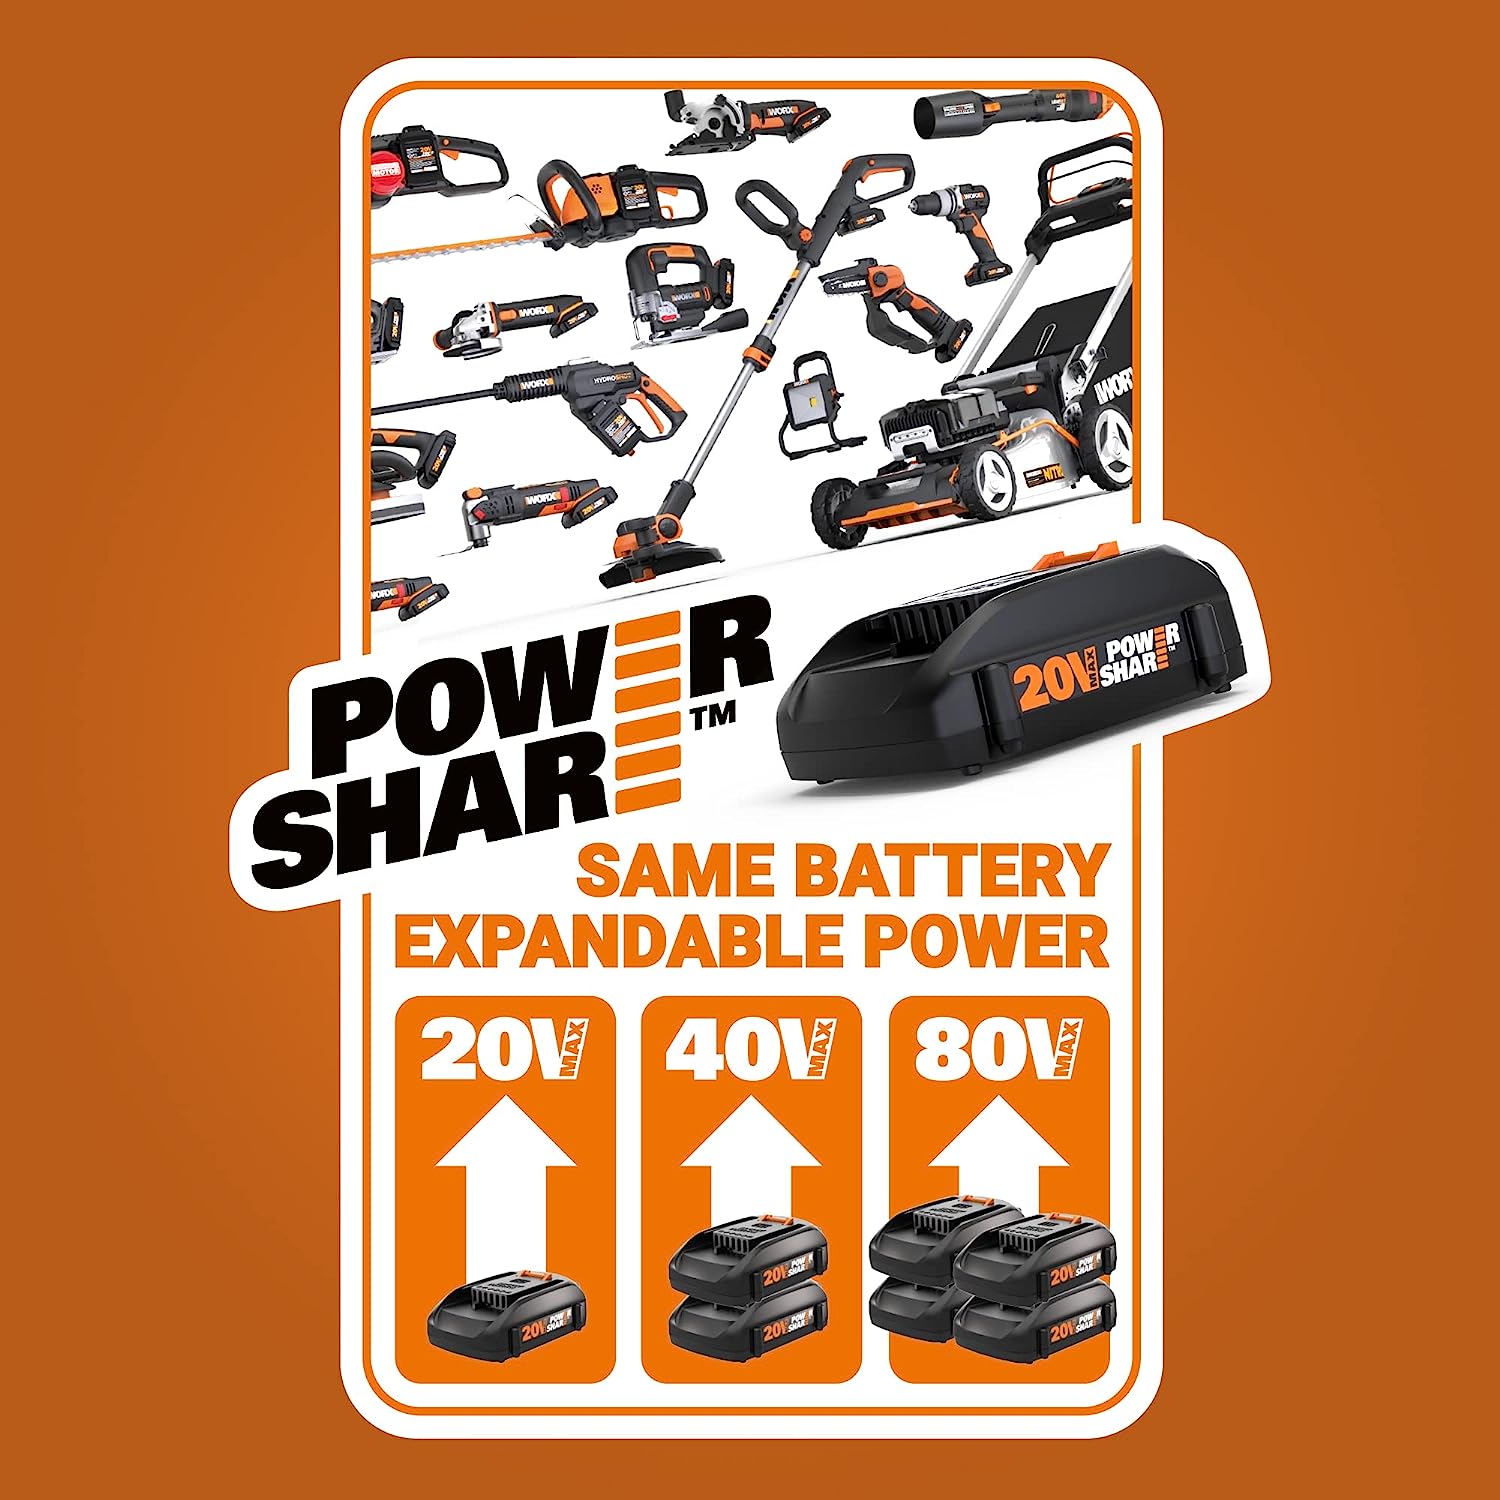 Worx 20V 2-Speed Cordless Leaf Blower with Turbine Fan, Lightweight for  Lawn Care - Battery & Charger Included